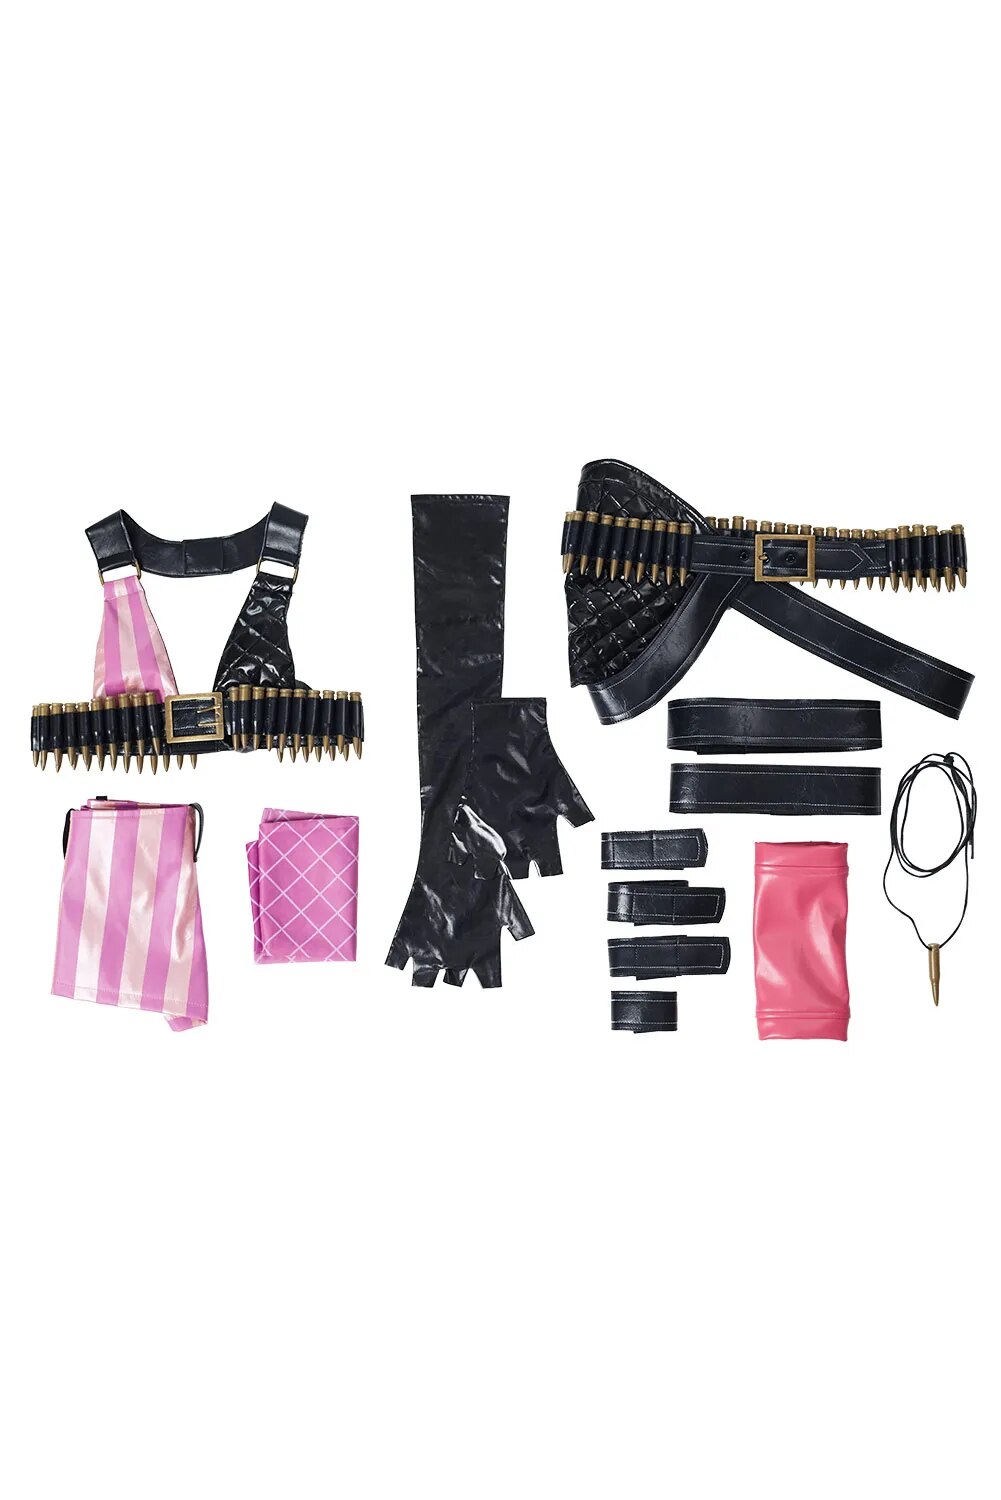 Jinx Cosplay Costume Anime Game  Women Pink Tube Top Stocking Gloves Outfits Halloween Party Role Play Suits For Female